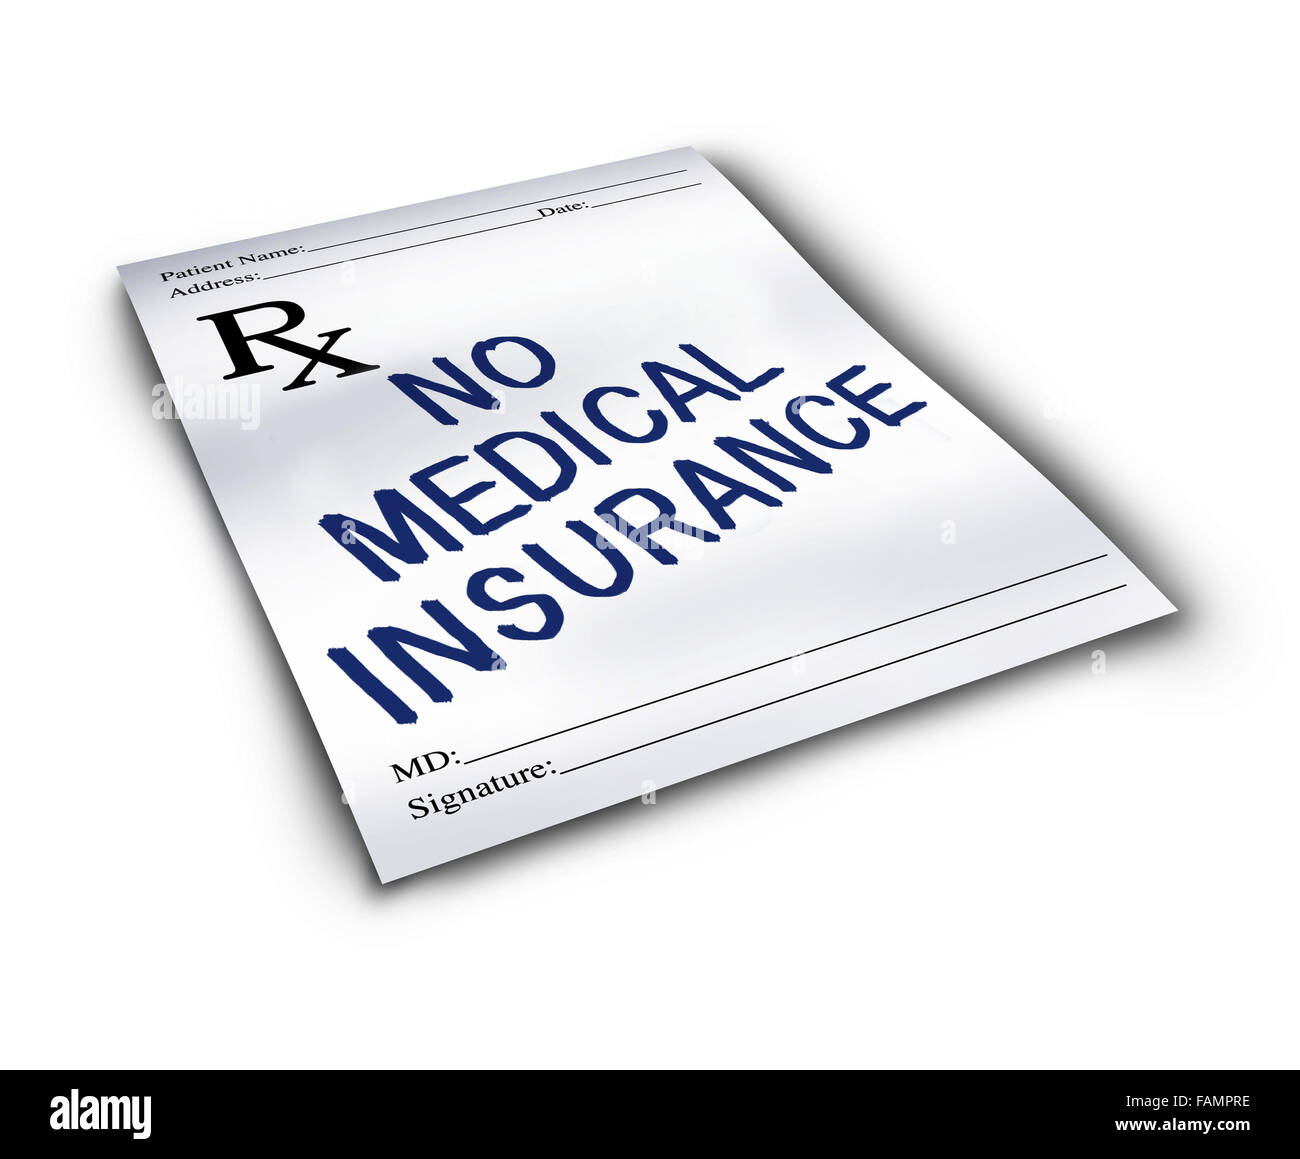 No medical insurance symbol and two tier health care system concept as a doctor prescription drug note with text representing the challenge of medicine affordability. Stock Photo